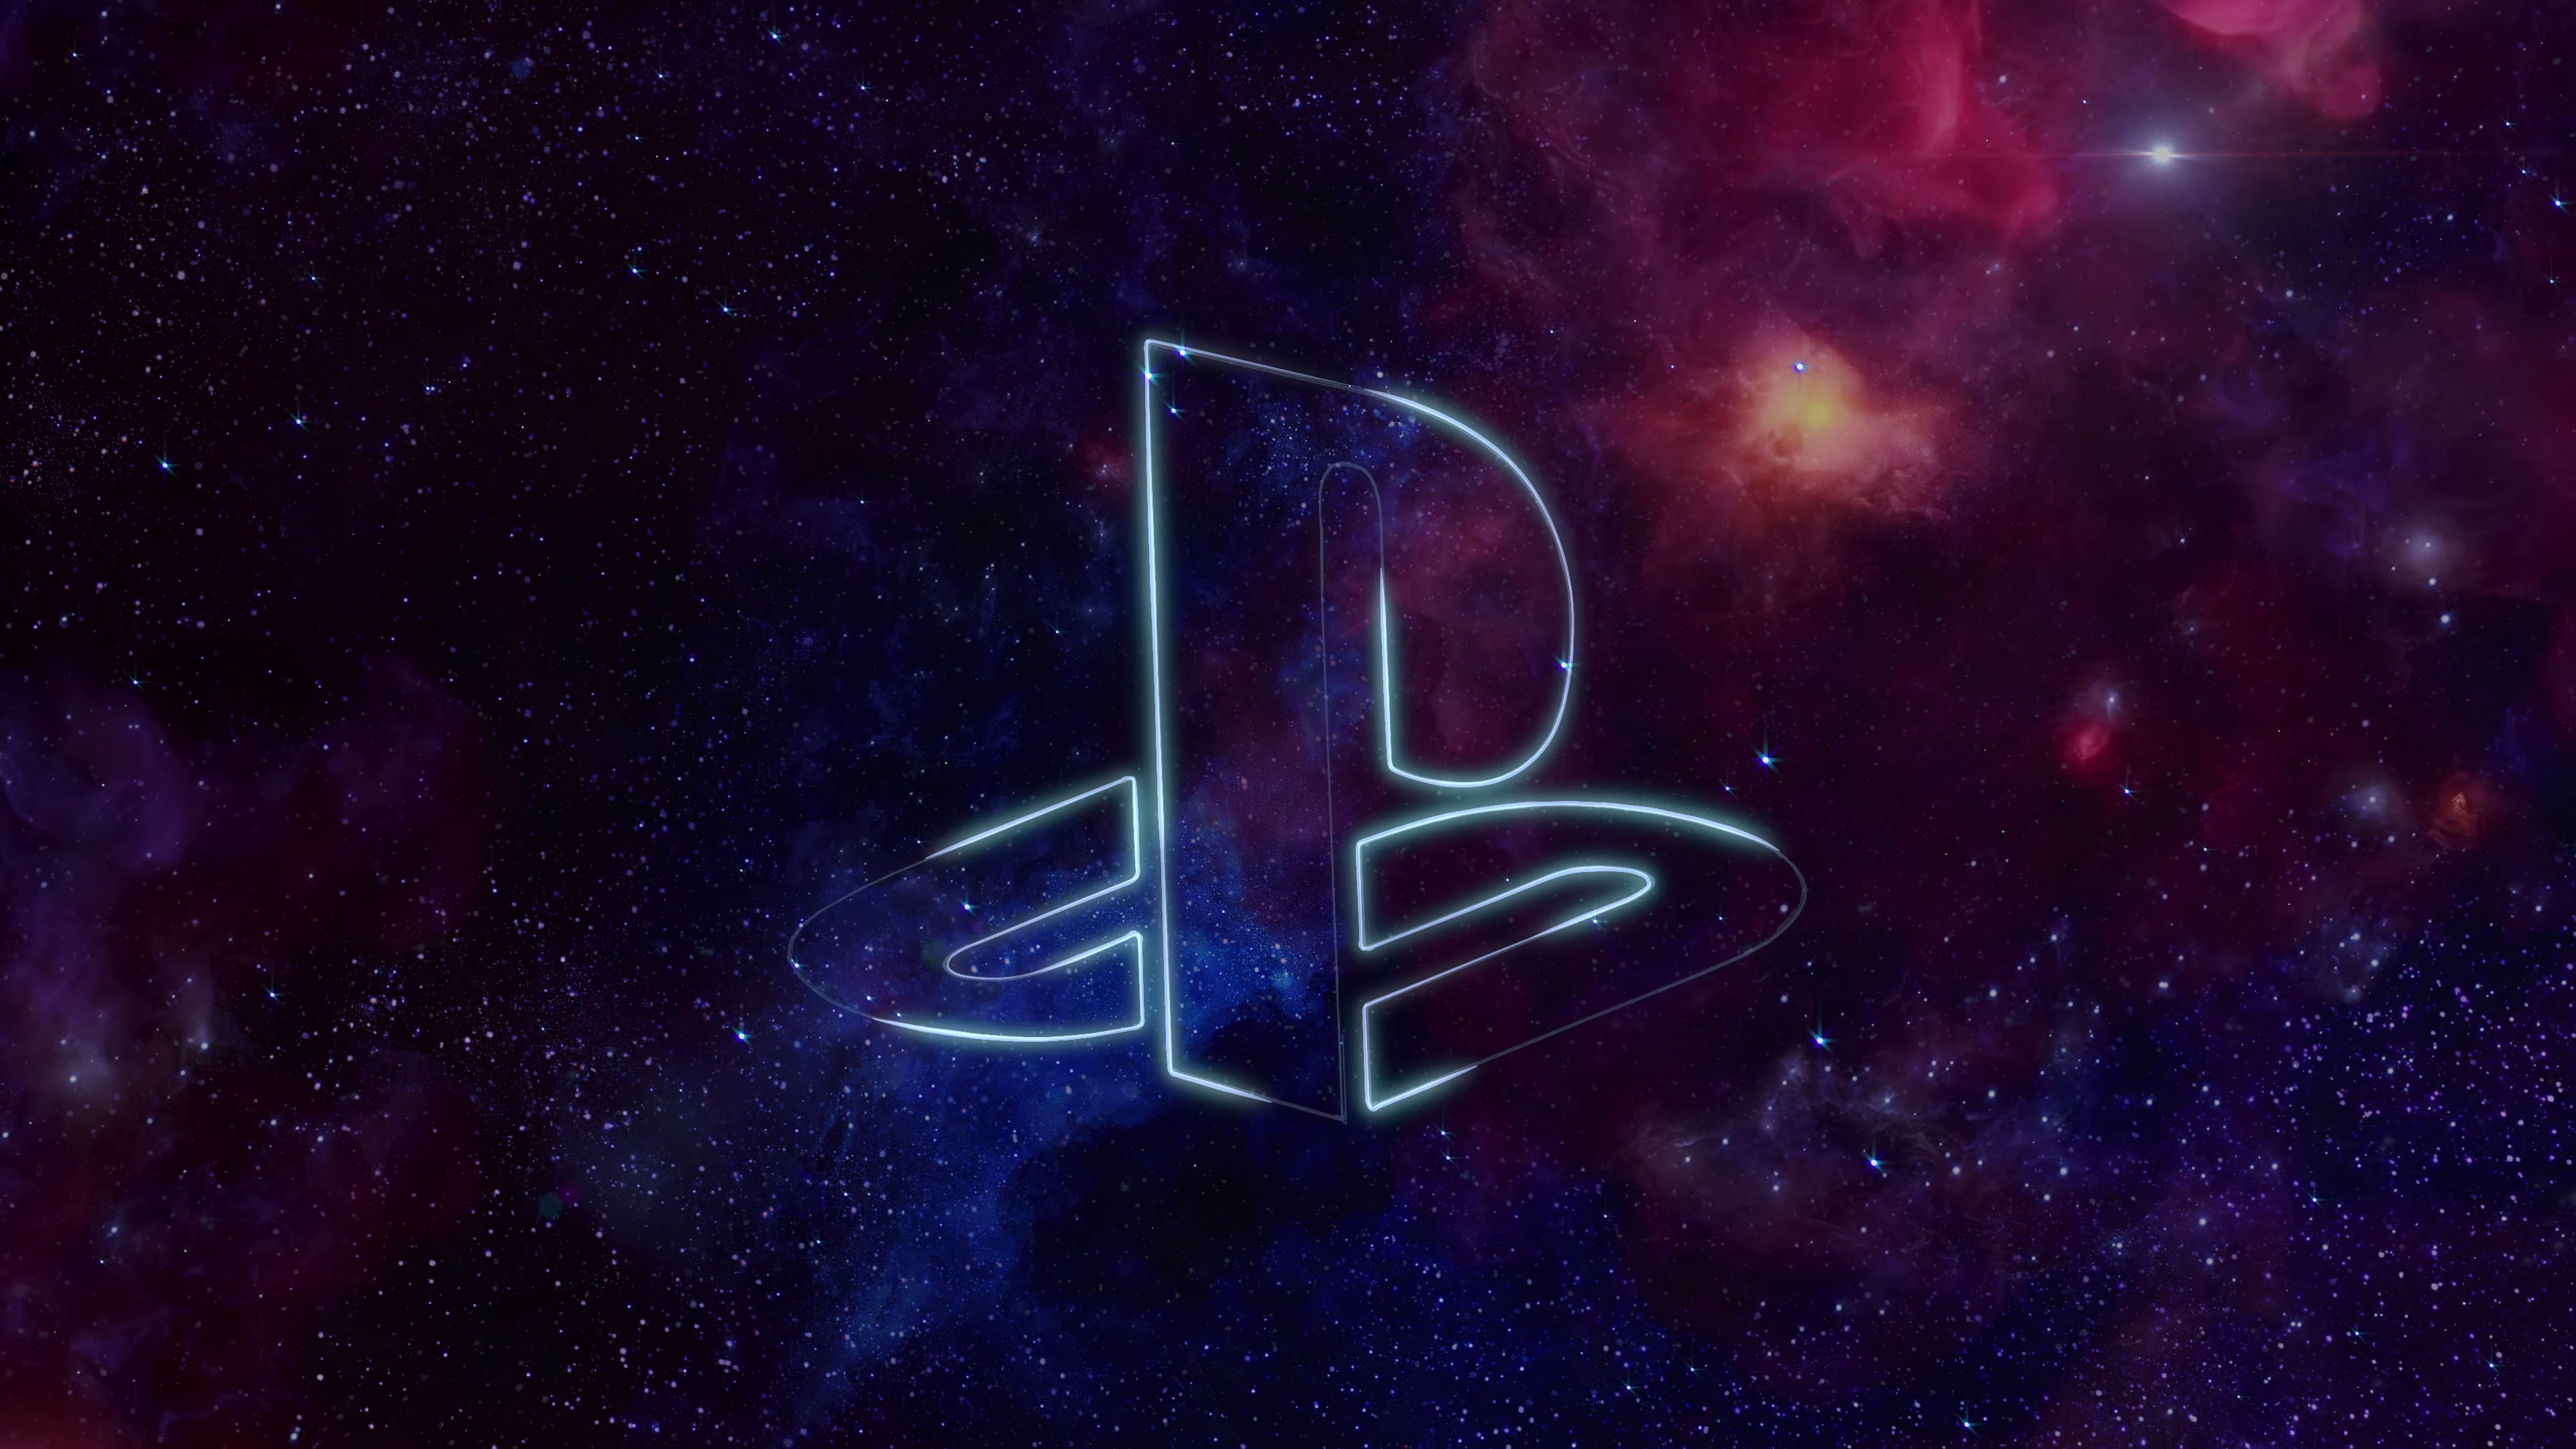 Wallpapers ps4 computer games on the desktop